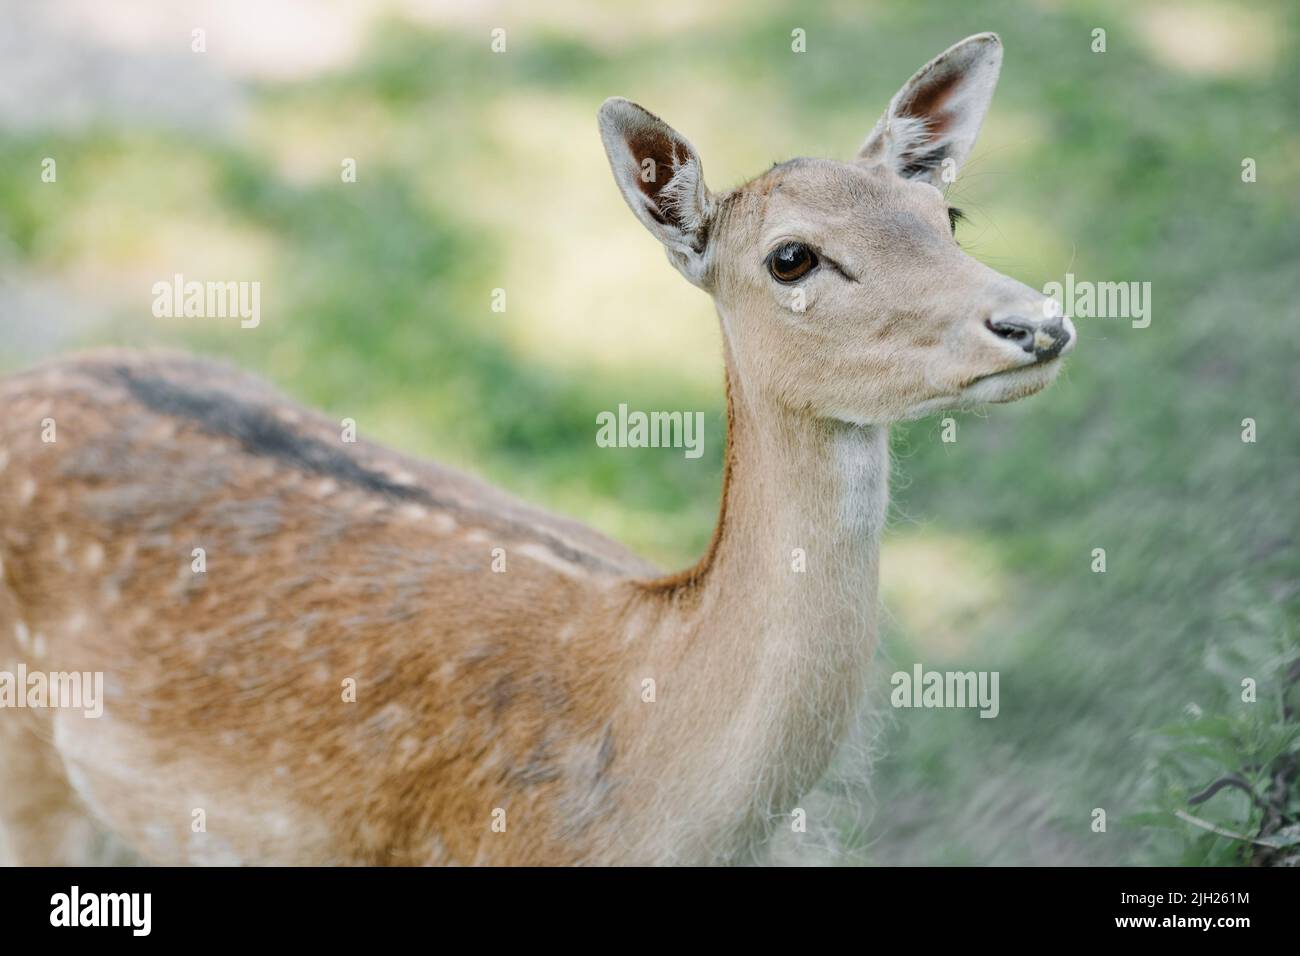 A spotted deer stands in the park on a background of grass and looks to the side. High quality photo Stock Photo